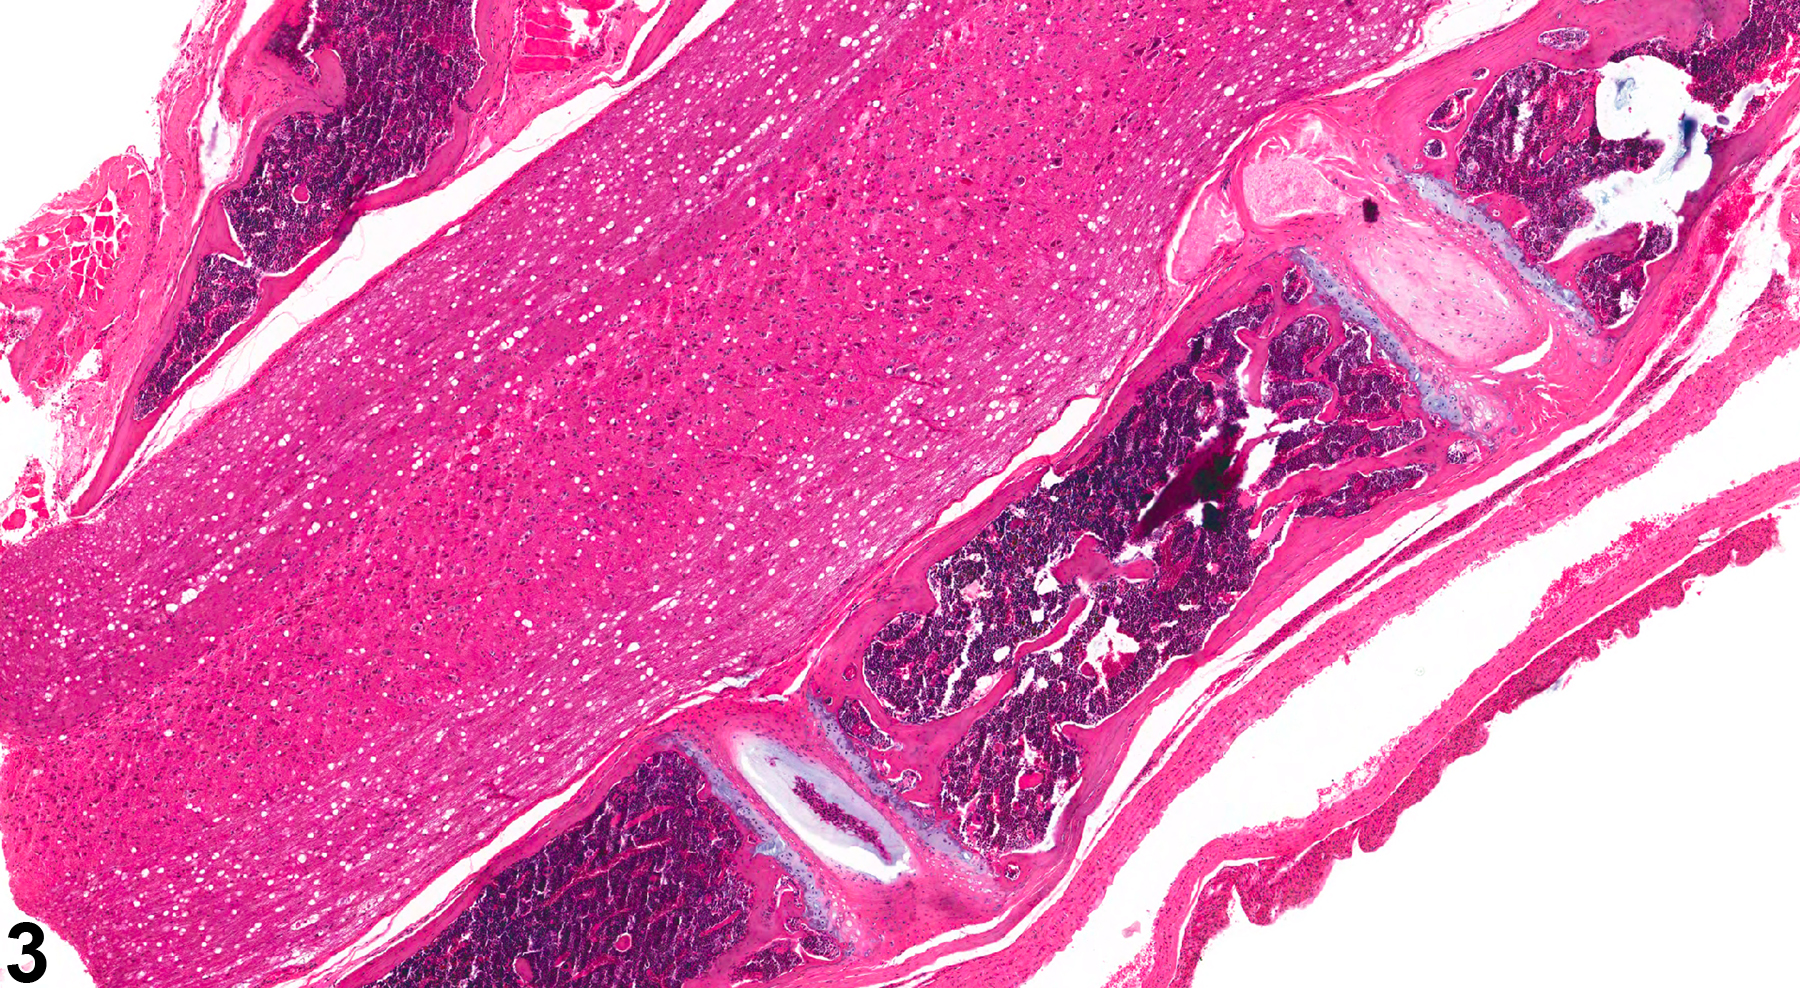 Image of intervertebral disc degeneration in the bone from a male B6C3F1/N mouse in a chronic study